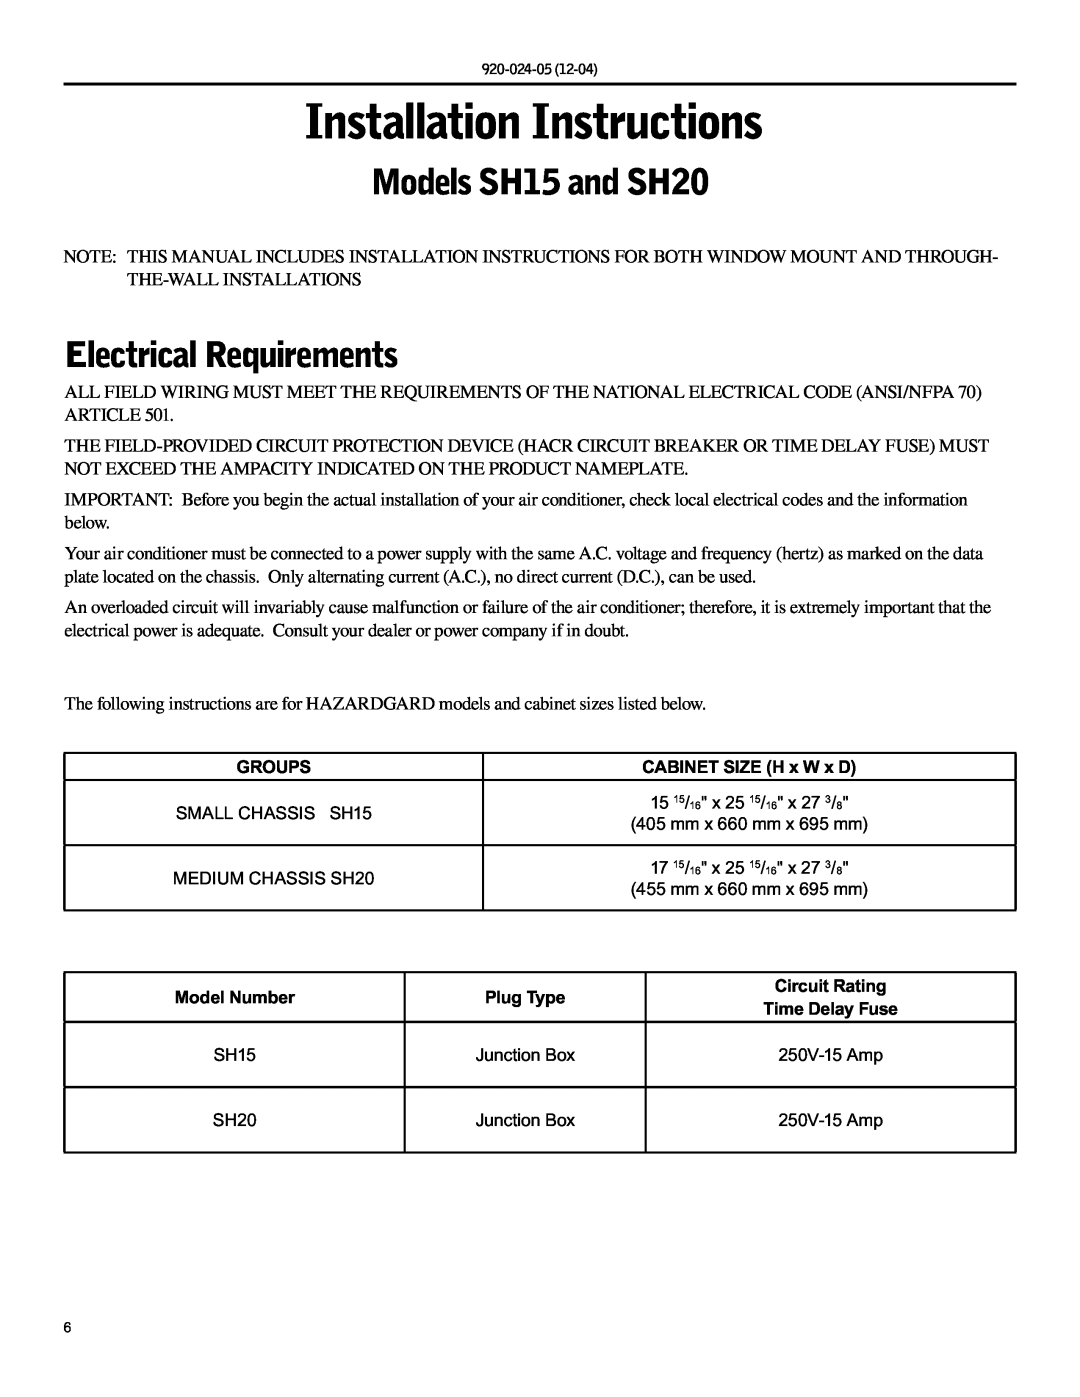 Friedrich operation manual Installation Instructions, Models SH15 and SH20, Electrical Requirements 